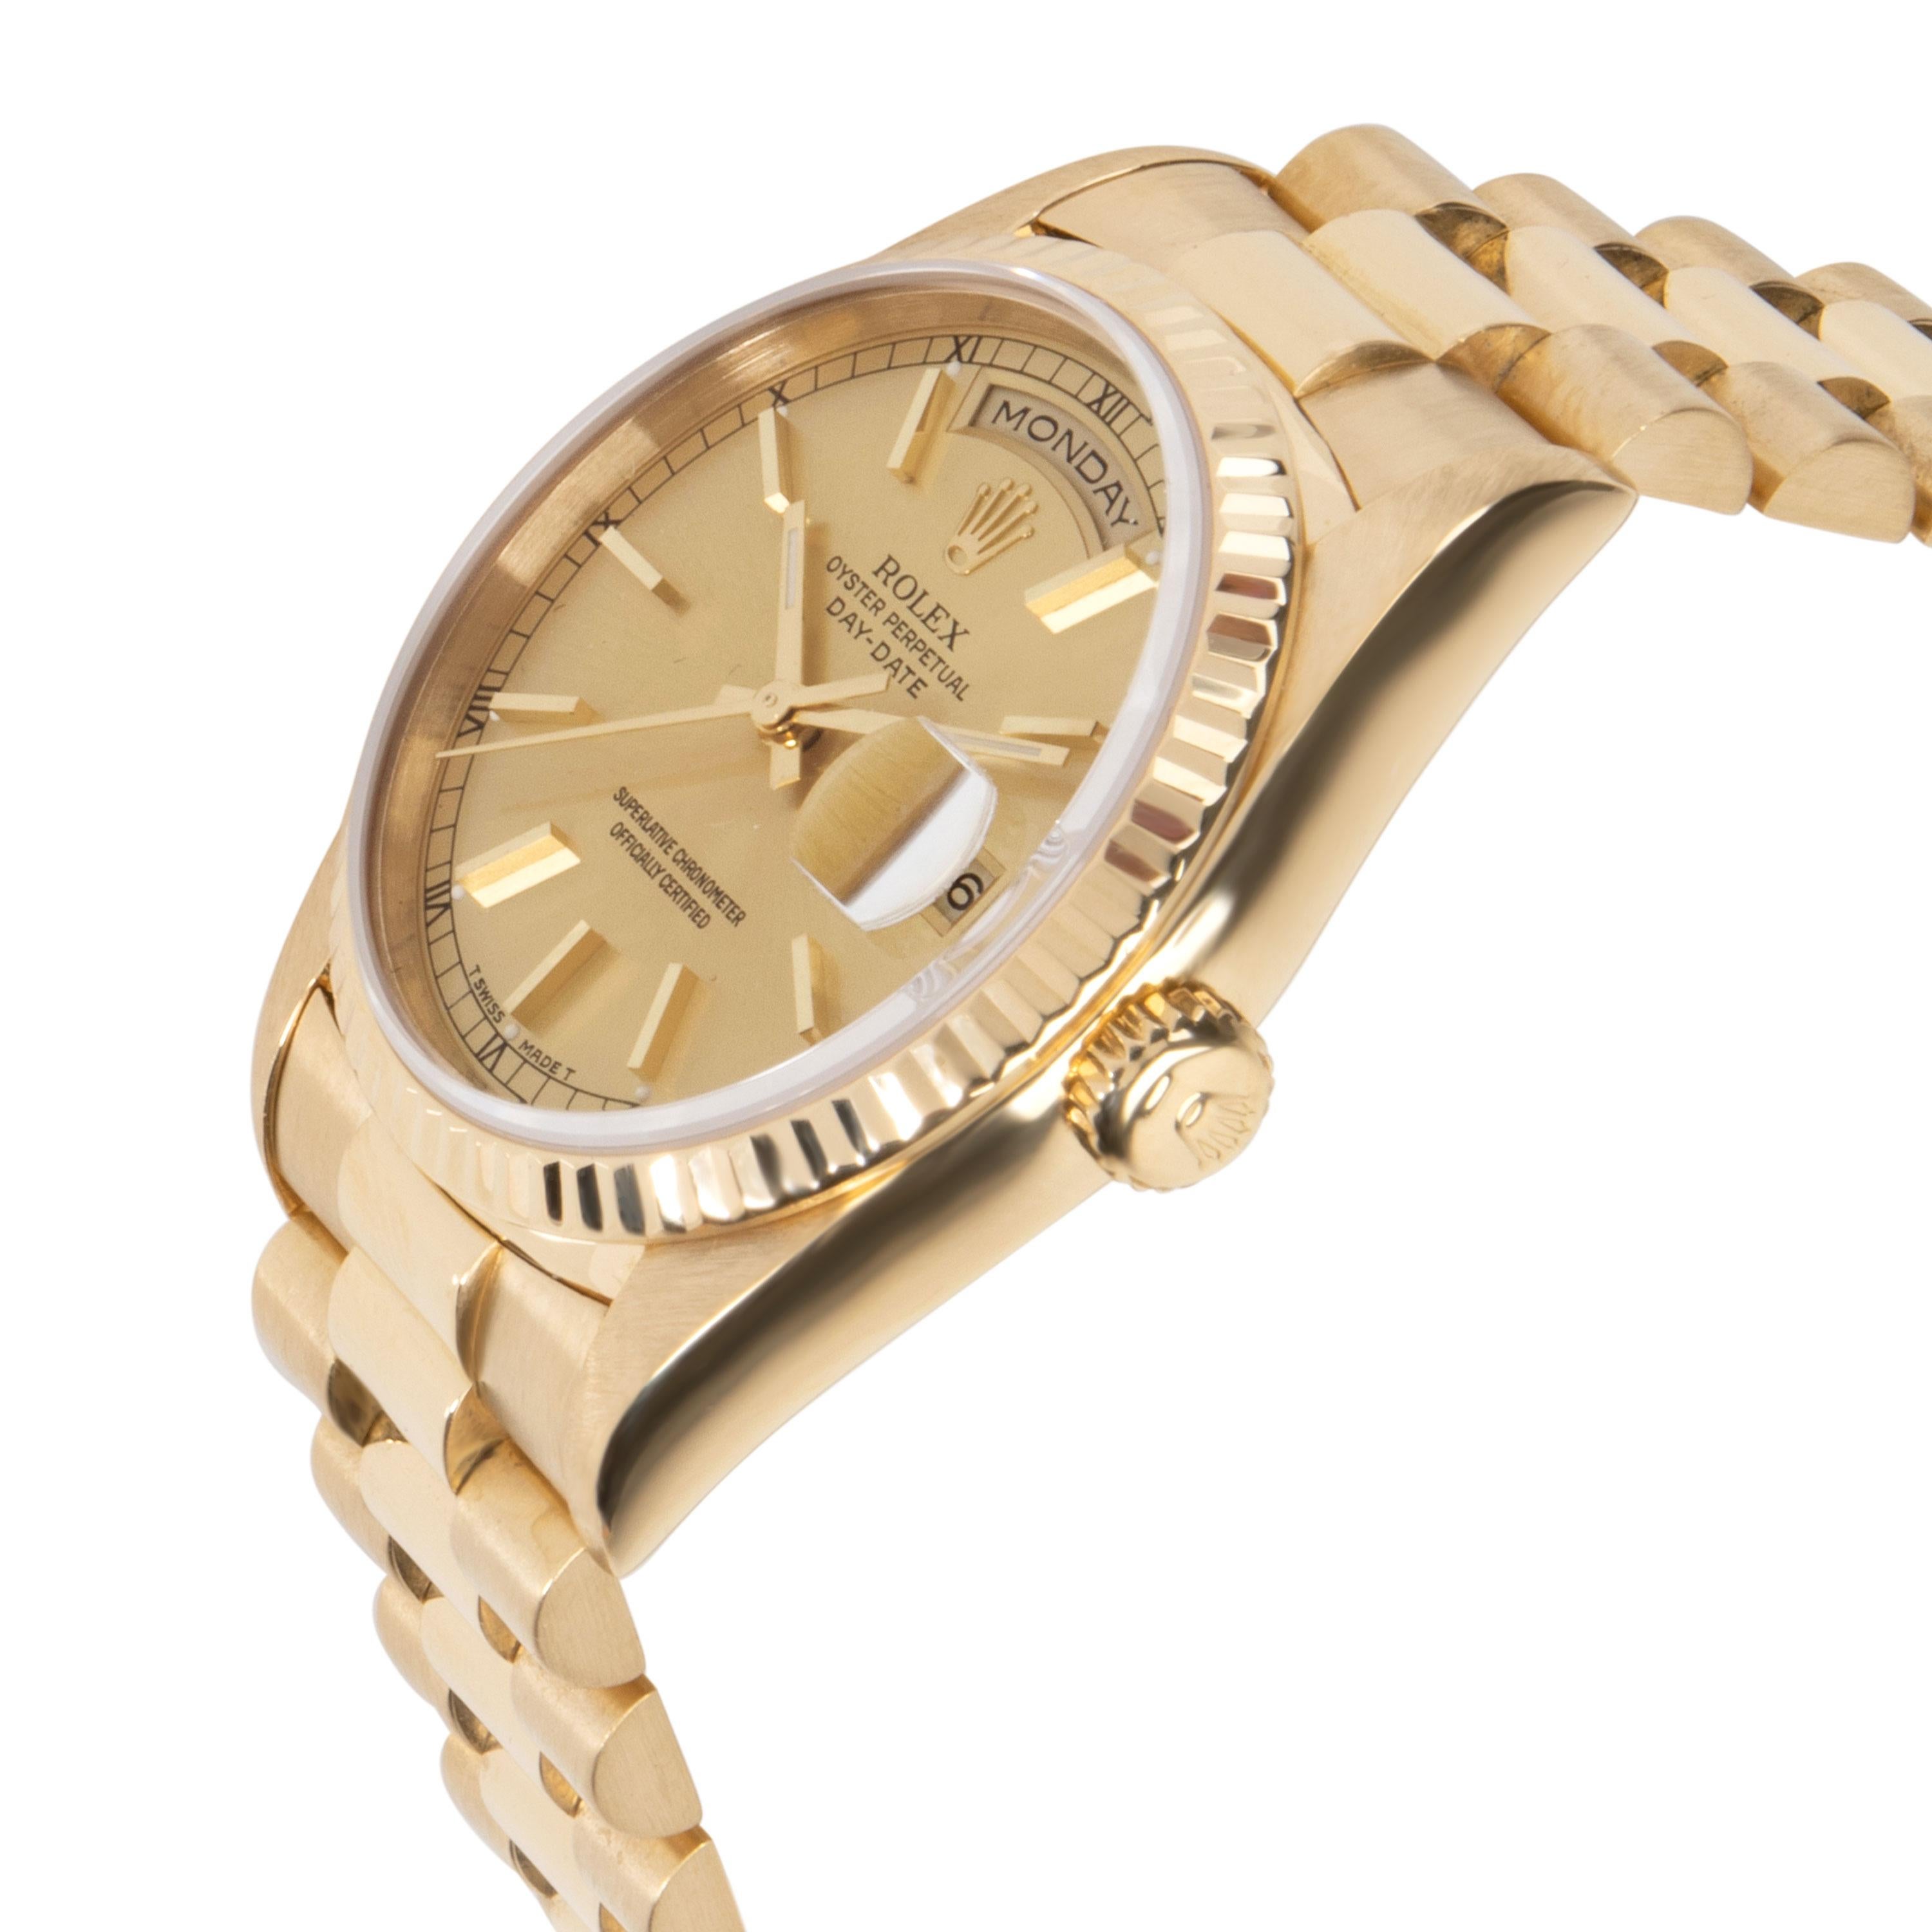 Rolex Day-Date President 18238 Men's Watch in 18kt Yellow Gold

SKU: 105524

PRIMARY DETAILS
Brand:  Rolex
Model: Day-Date
Serial Number: ***
Country of Origin: Switzerland
Movement Type: Mechanical: Automatic/Kinetic
Refurbished Notes: Overhaul,